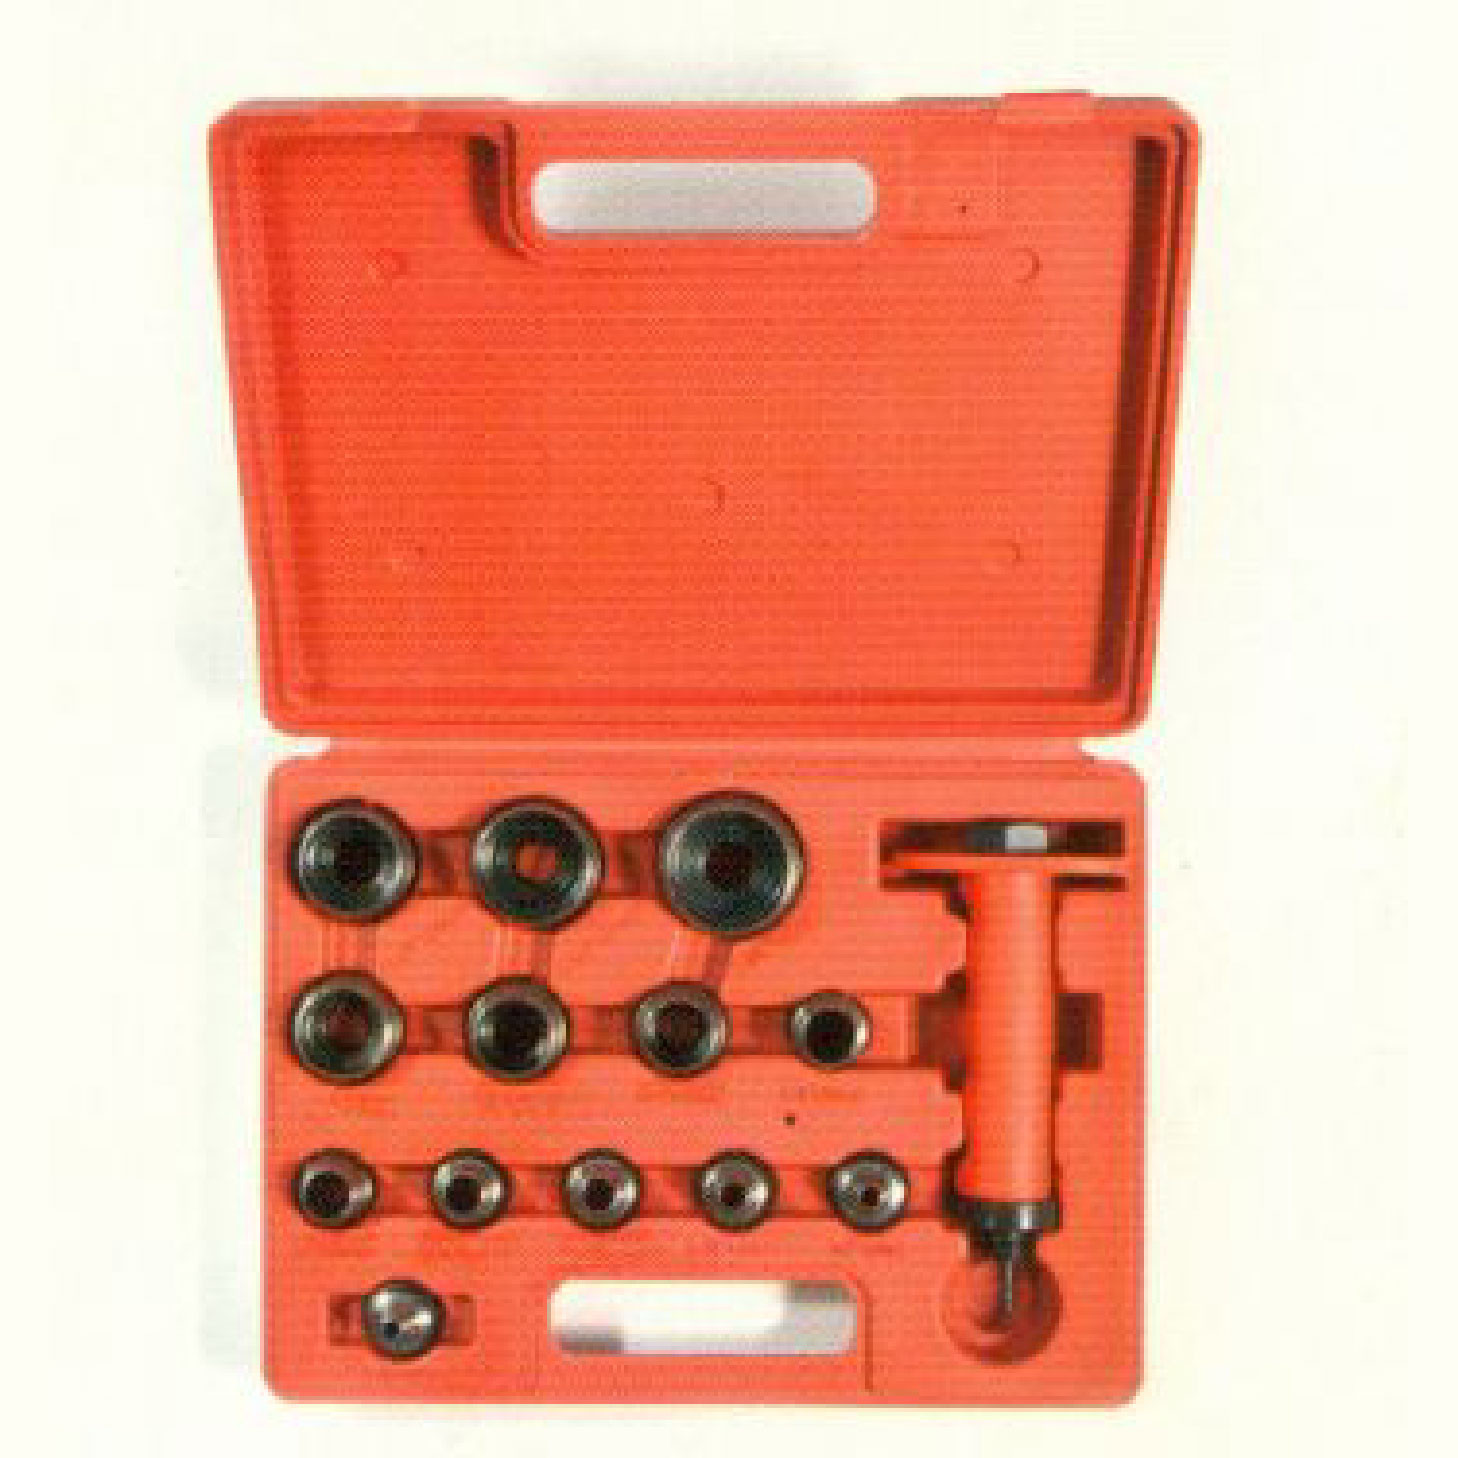 13 in 1 supersharp hollow punch set